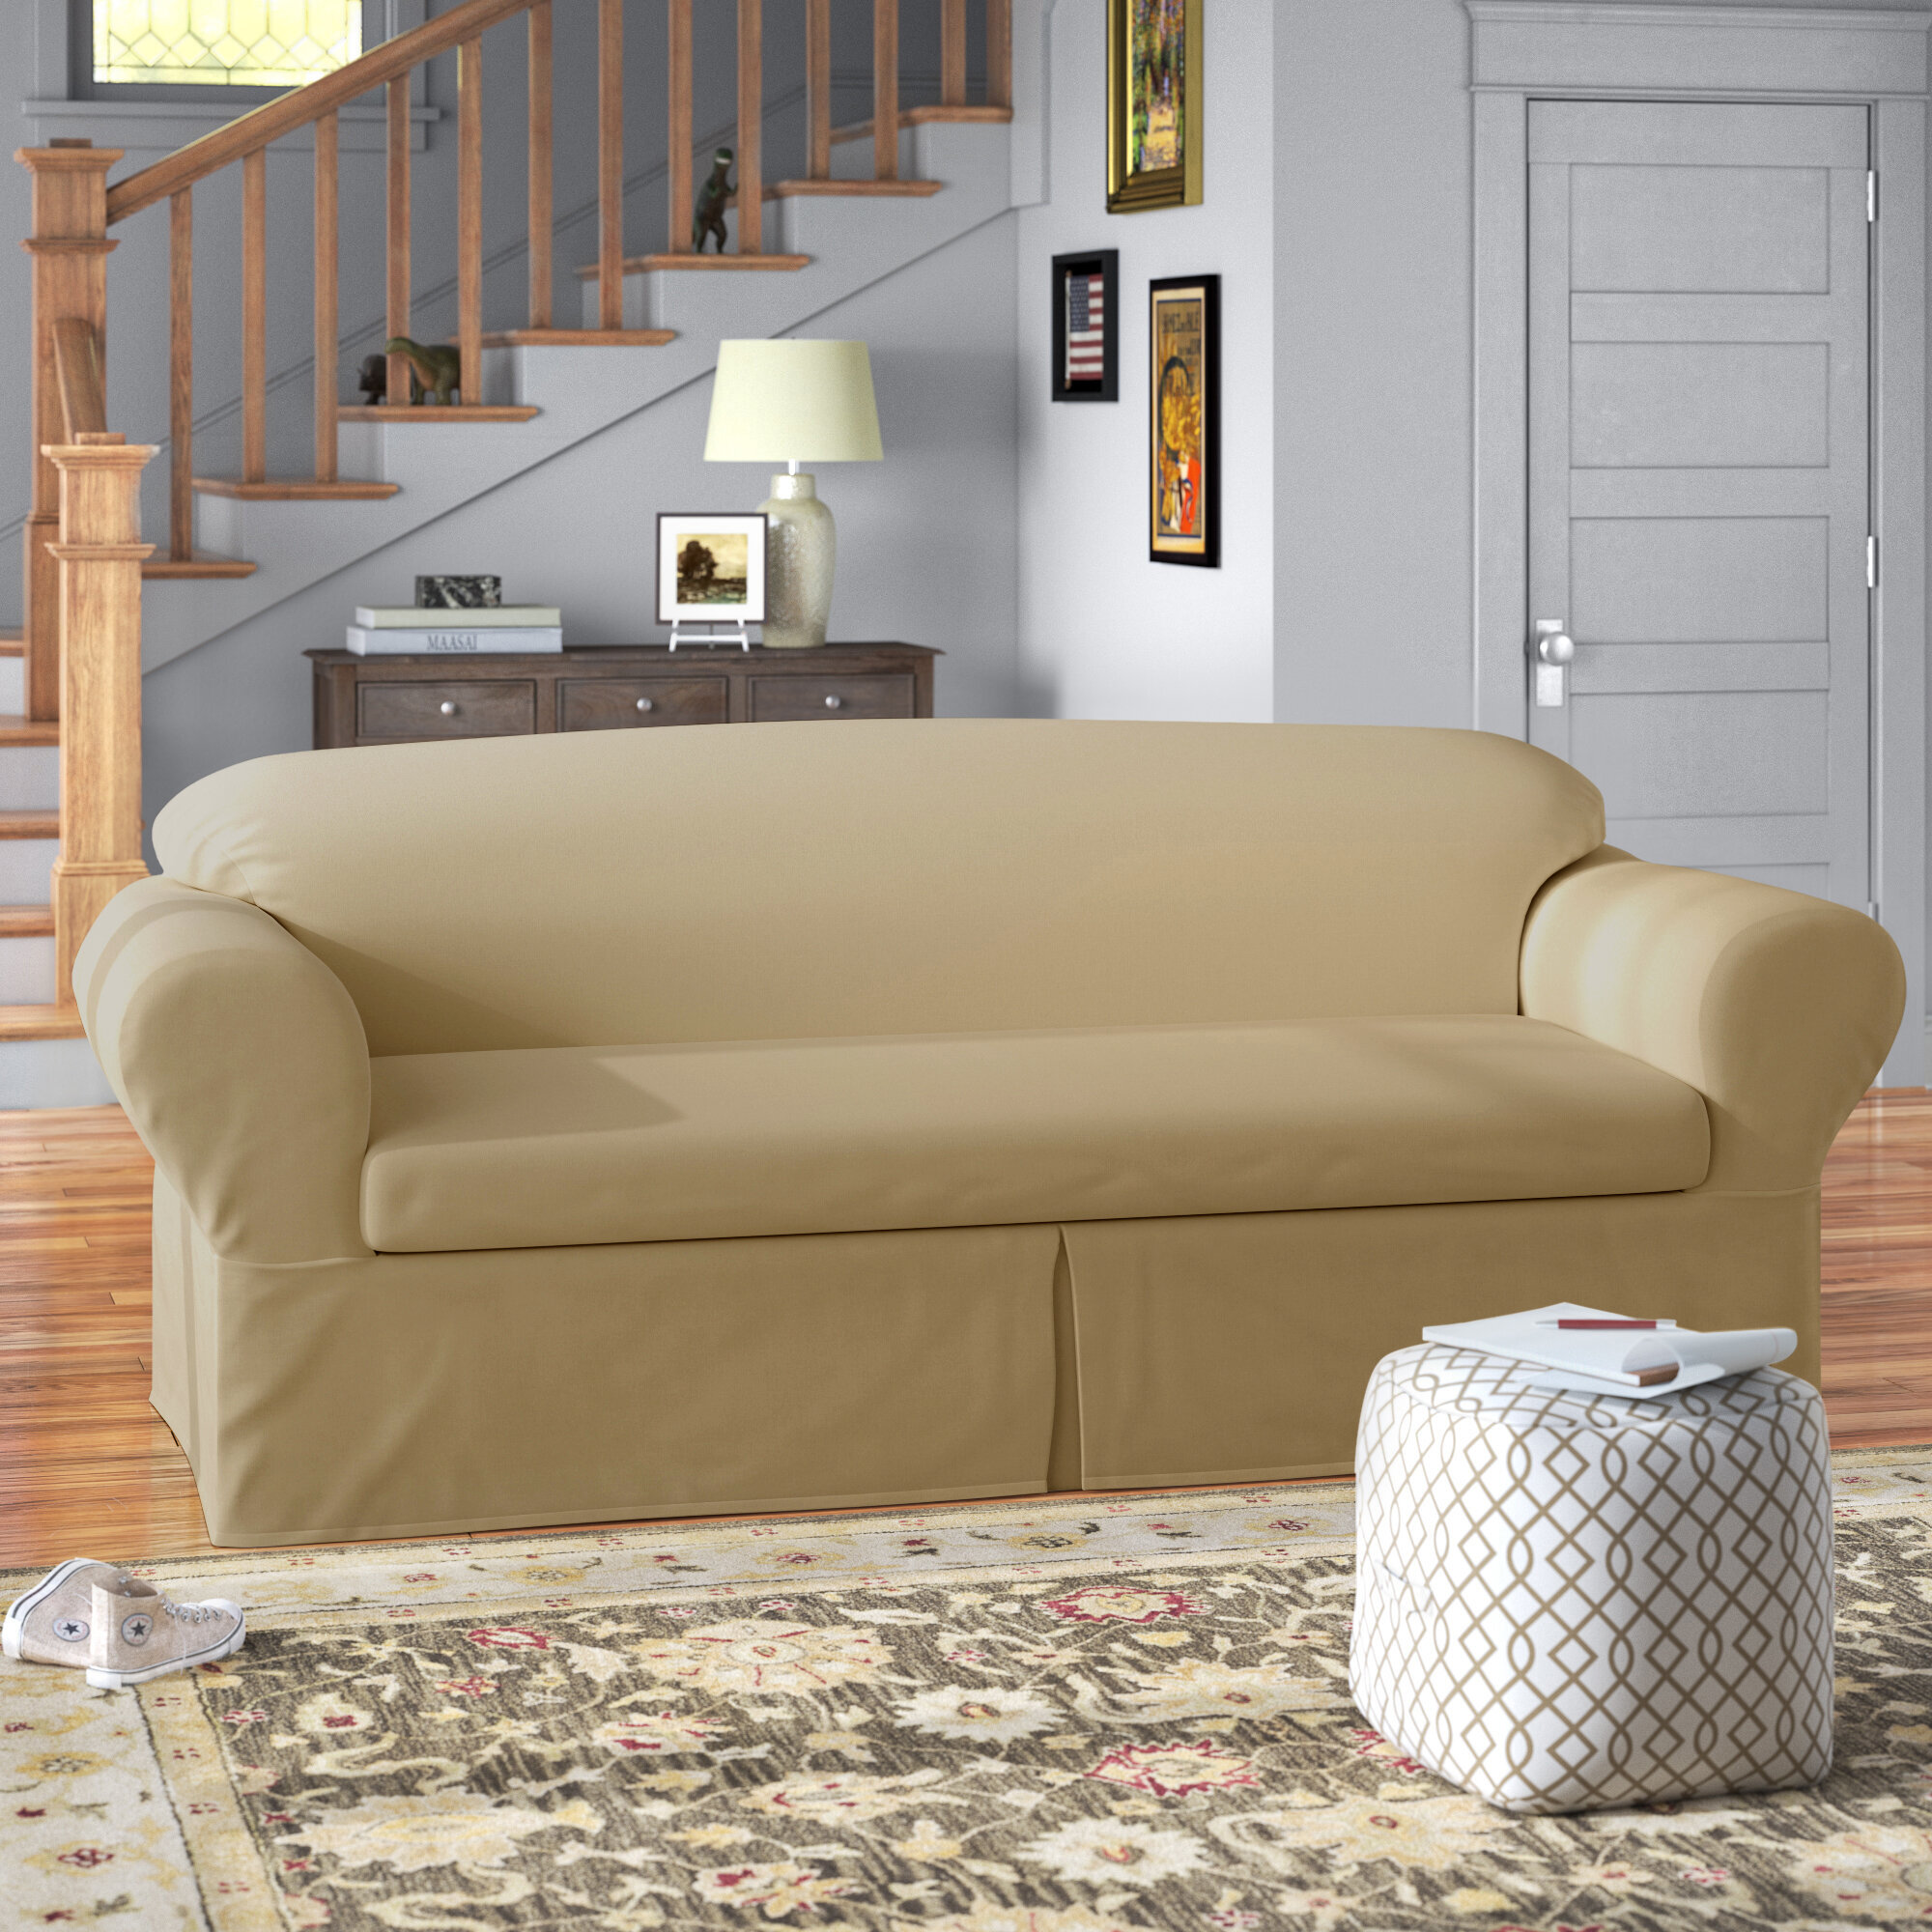 Details about   Plain Solid Pattern Slipcovers Sofa Cover Stretch Sofa Covers Couch Cover Soft 